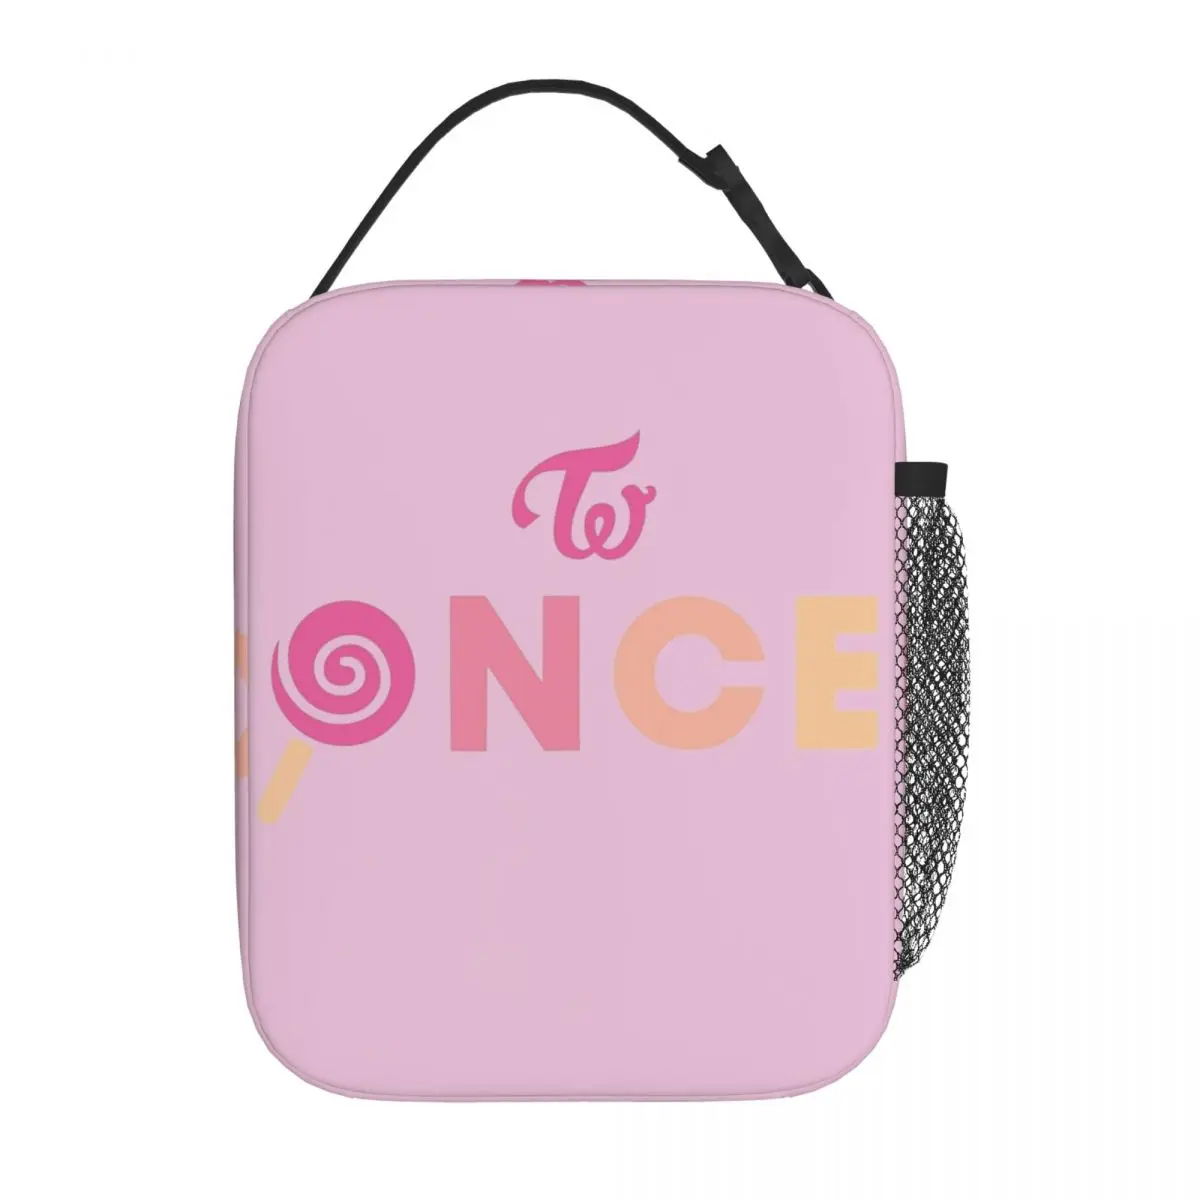 

ONCE TWICE Kpop Fan Gift Accessories Insulated Lunch Bag For Travel Food Storage Bag Portable Thermal Cooler Lunch Boxes